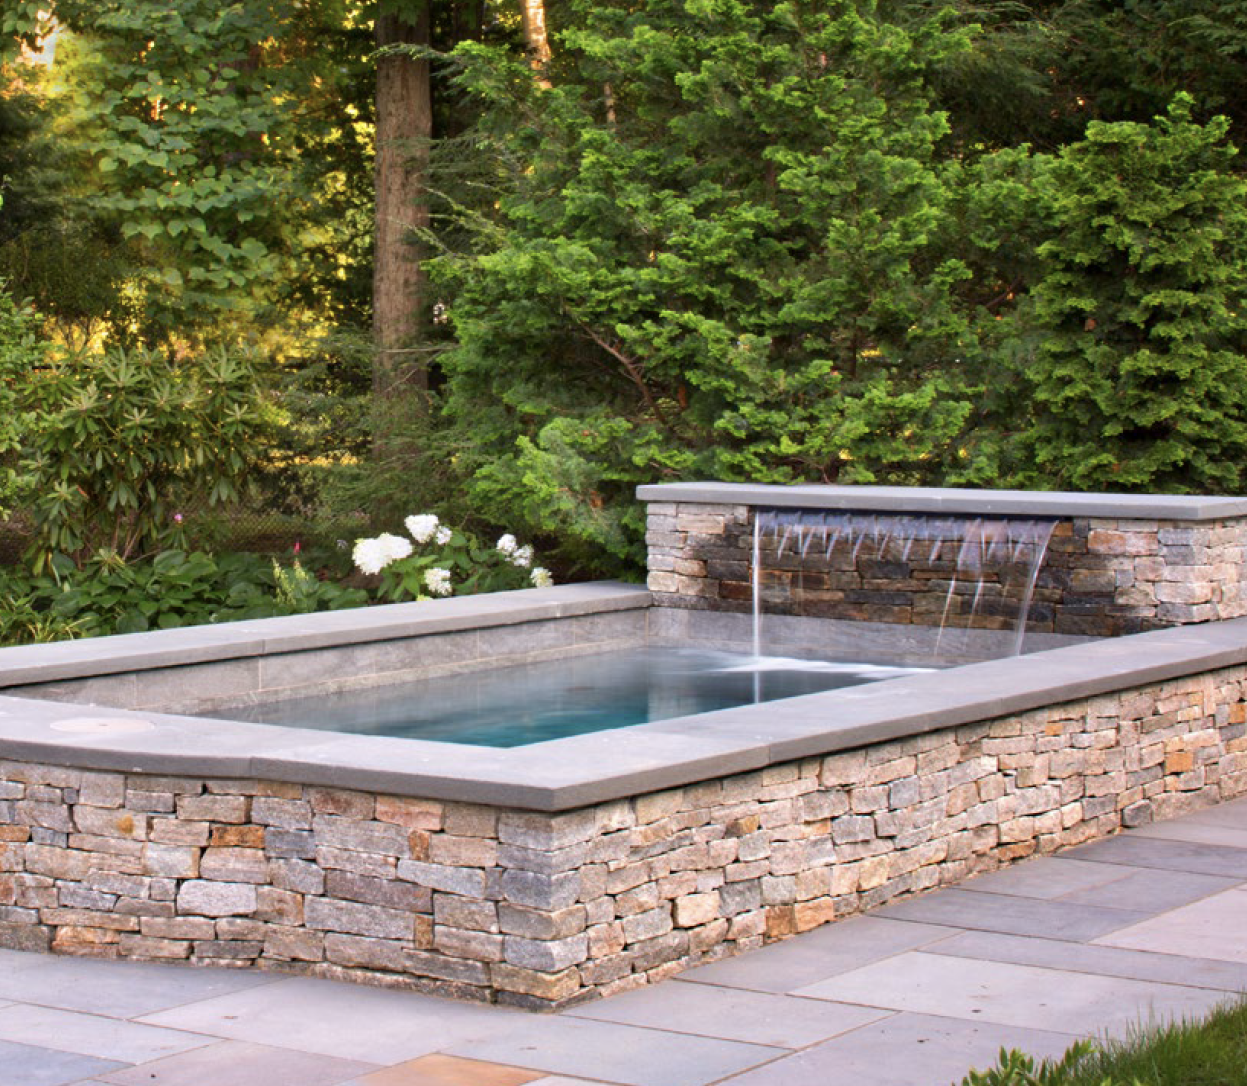 Cocktail pool with waterfall and stone patio